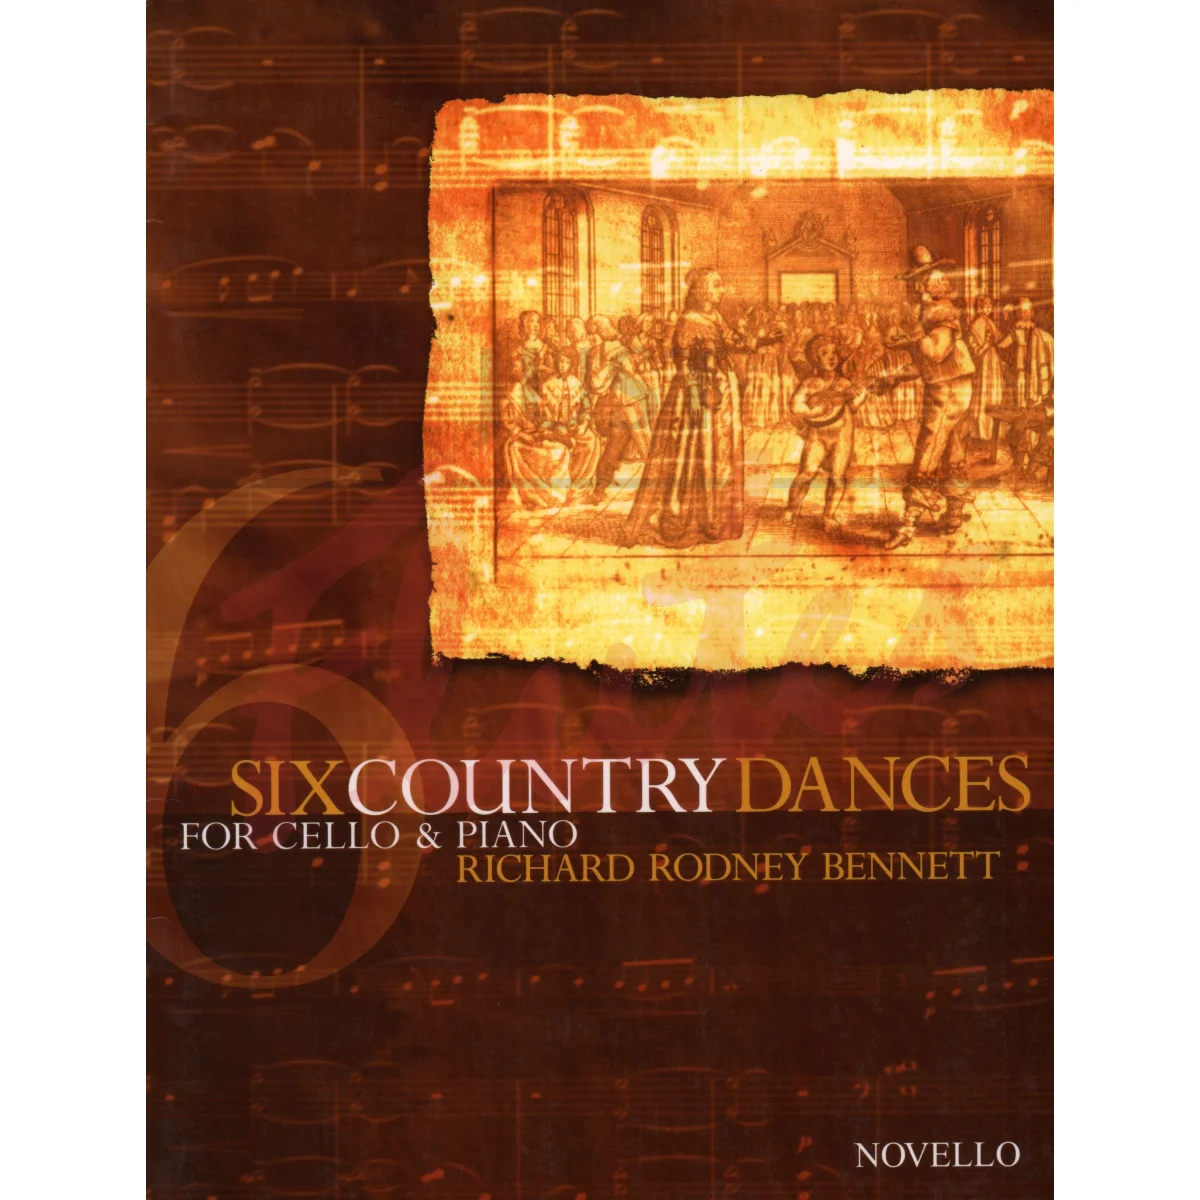 Six Country Dances for Cello and Piano